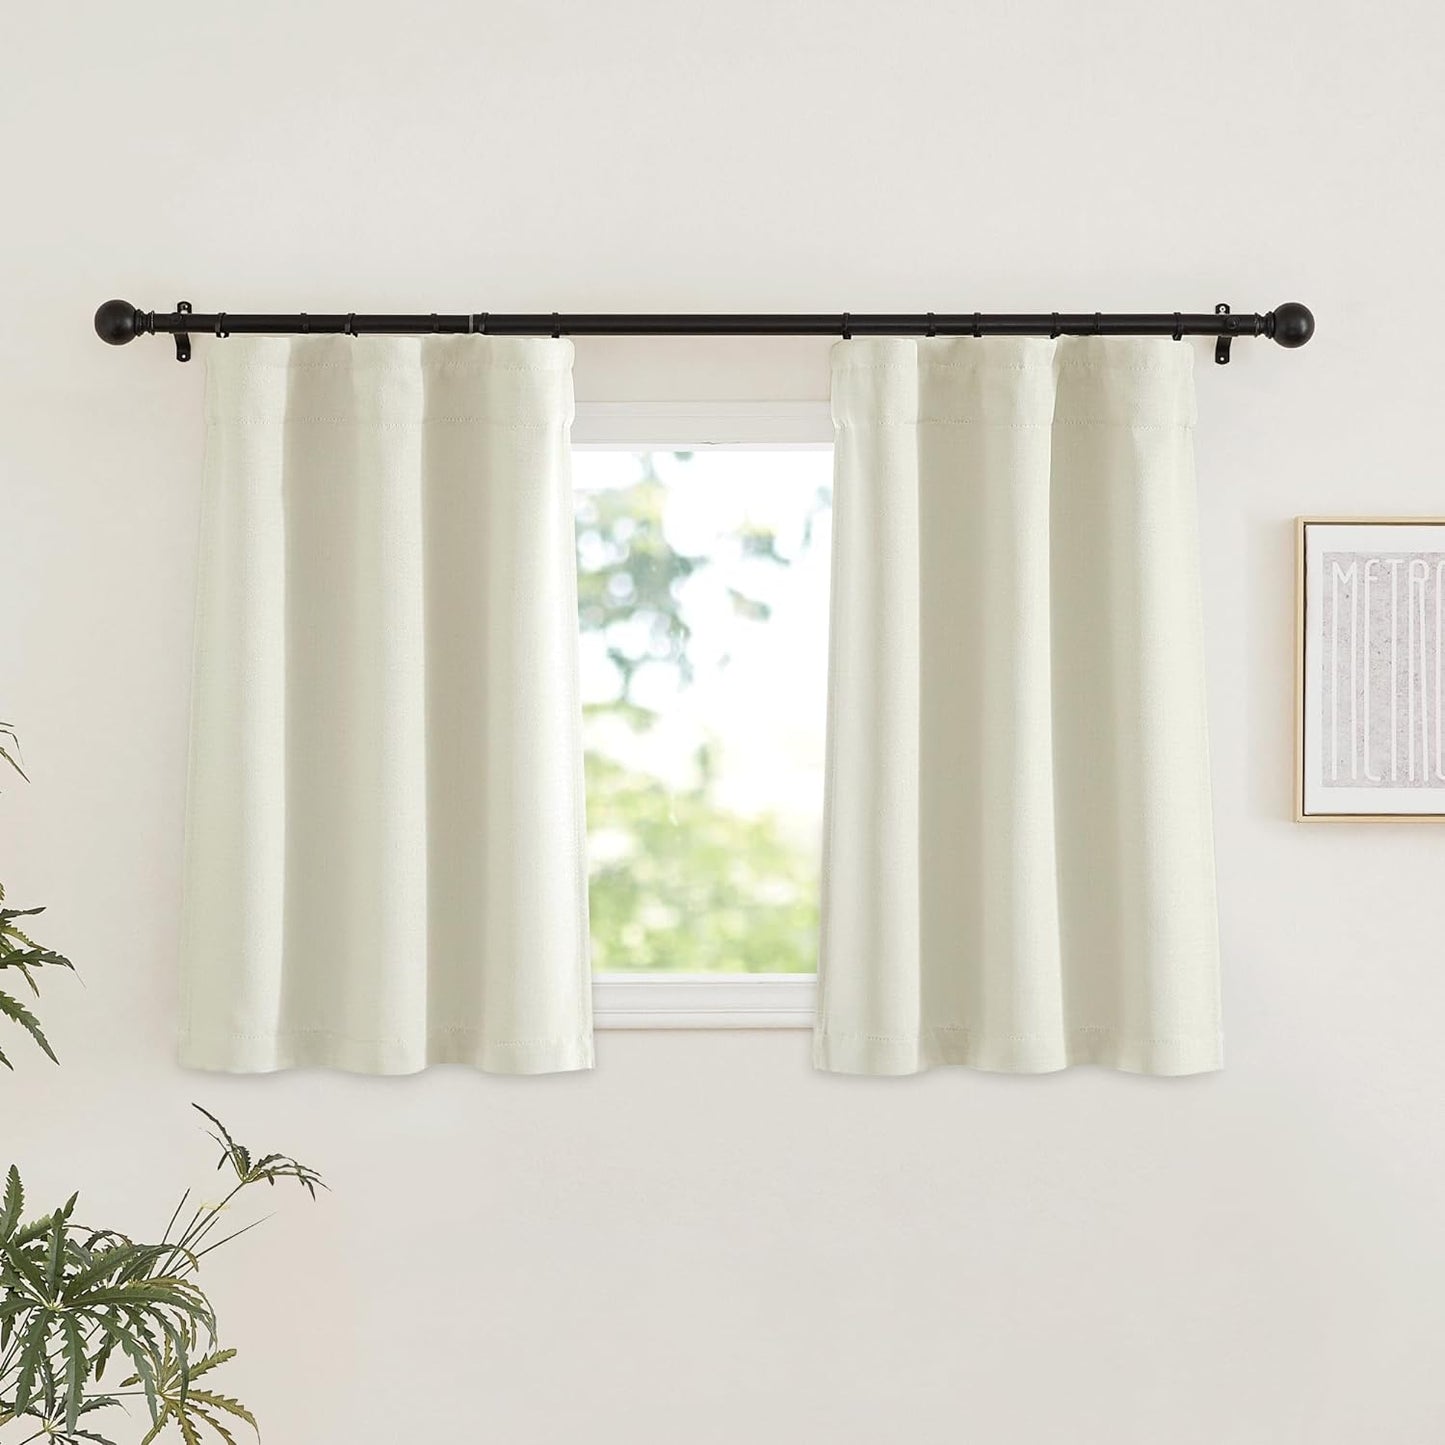 NICETOWN Faux Linen Room Darkening Curtains & Drapes for Living Room, Dual Rod Pockets & Hook Belt Heat/Light Blocking Window Treatments Thermal Drapes for Bedroom, Angora, W52 X L84, 2 Panels  NICETOWN Natural W34 X L30 